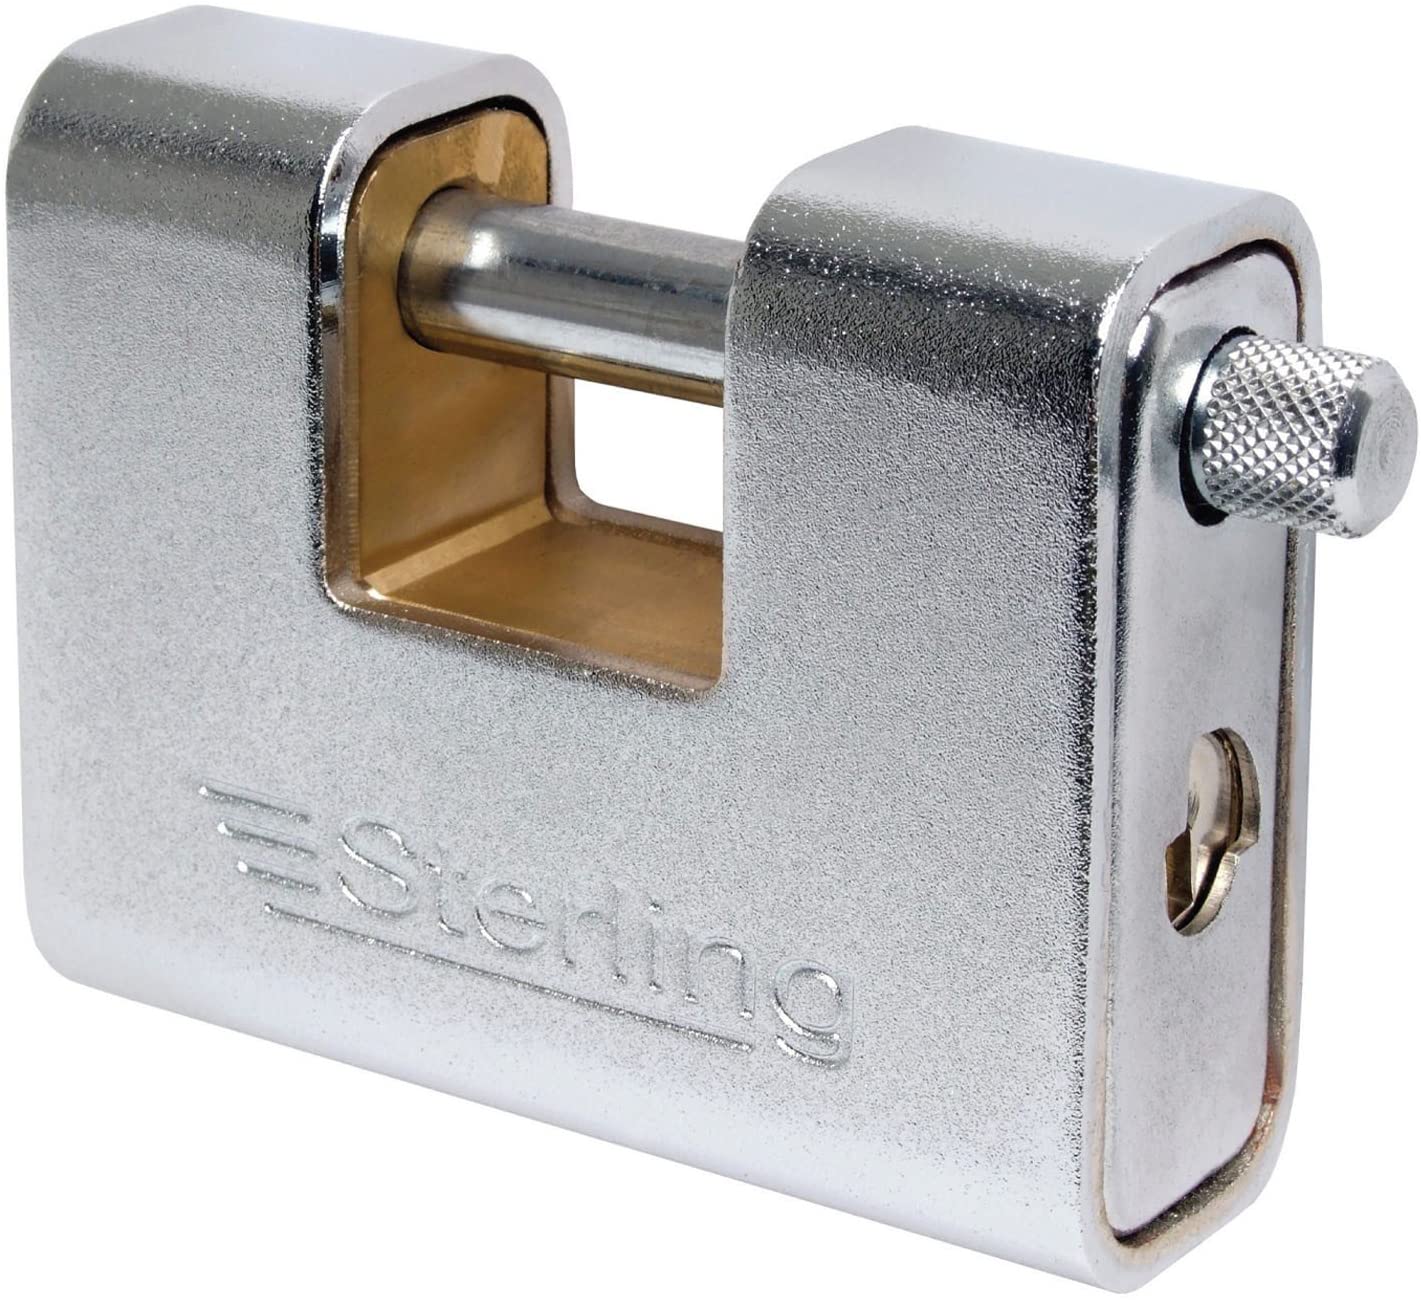 Sterling ASP190 Armoured Steel Shutter Padlock - Anti-drill cylinder